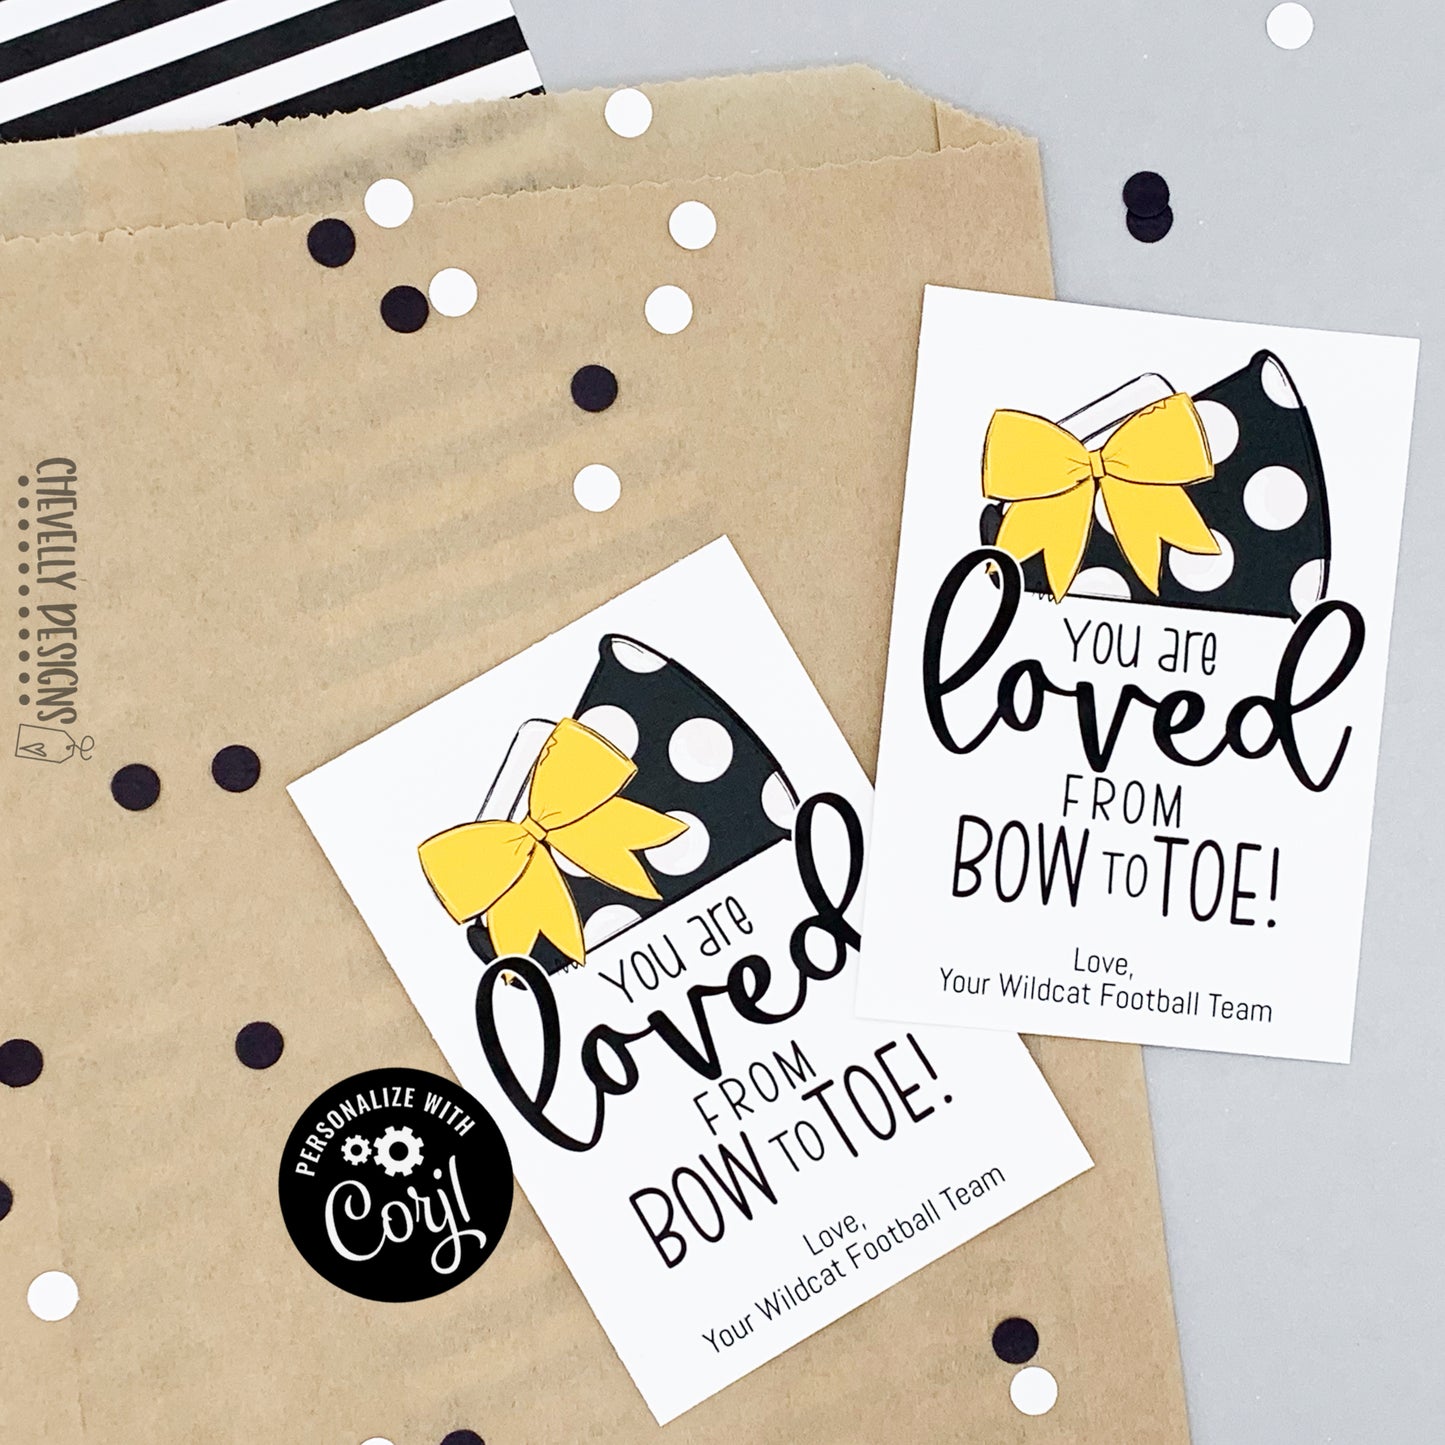 Editable - Gift Tags for Cheerleaders - Yellow Gold and Black Cheer Bow Megaphone - Printable Digital File